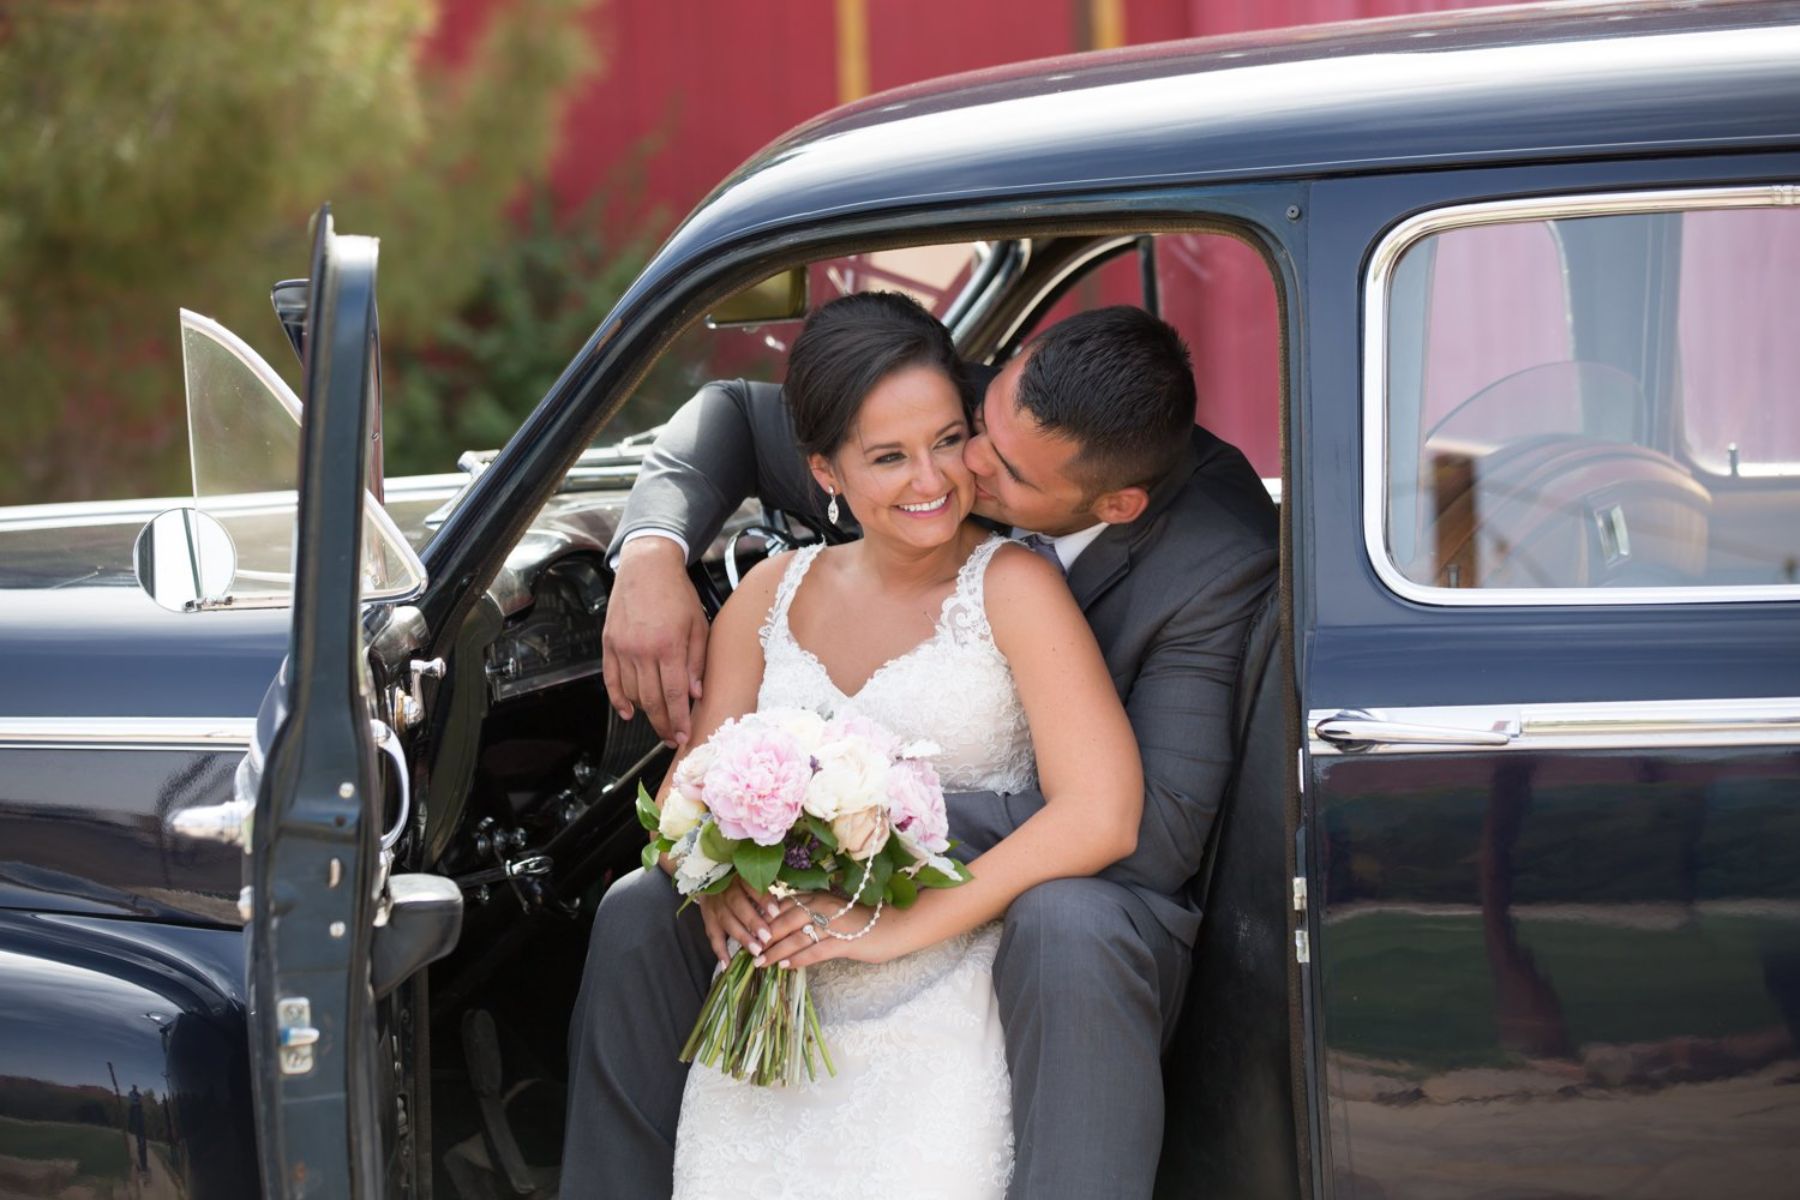 Newlyweds smiling together in car